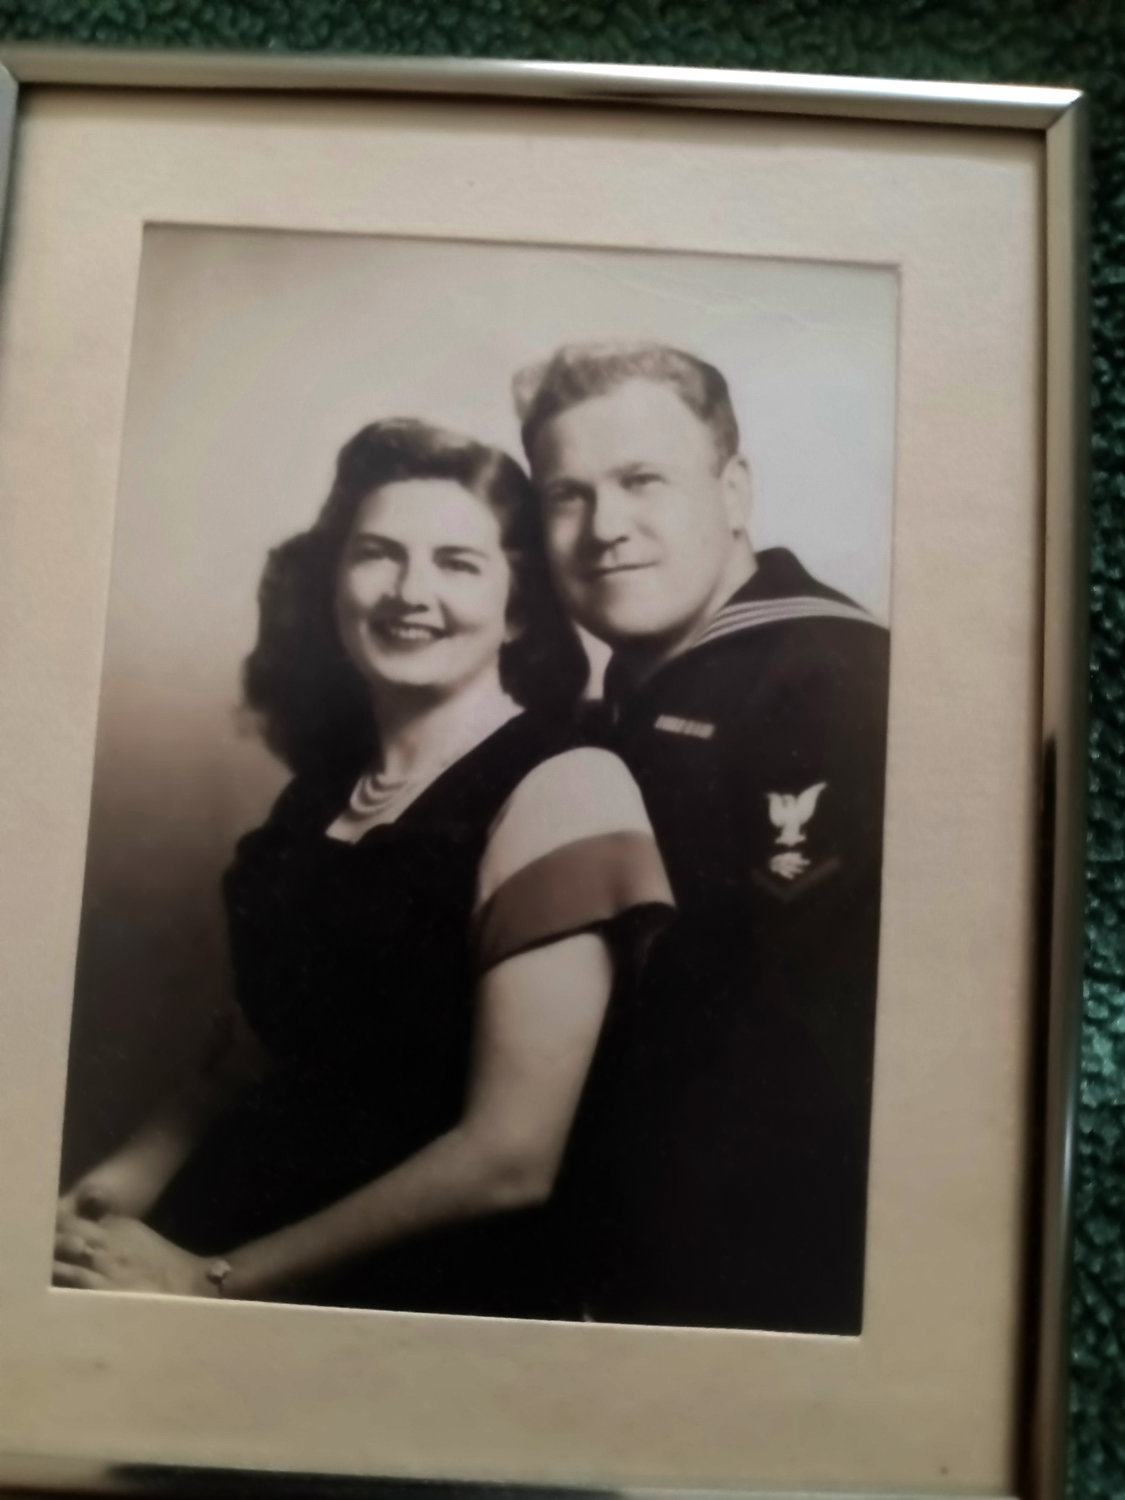 The writer’s parents in the waning days of World War II, with his Dad in his Navy uniform. They were married June 1945, two months before VJ Day.